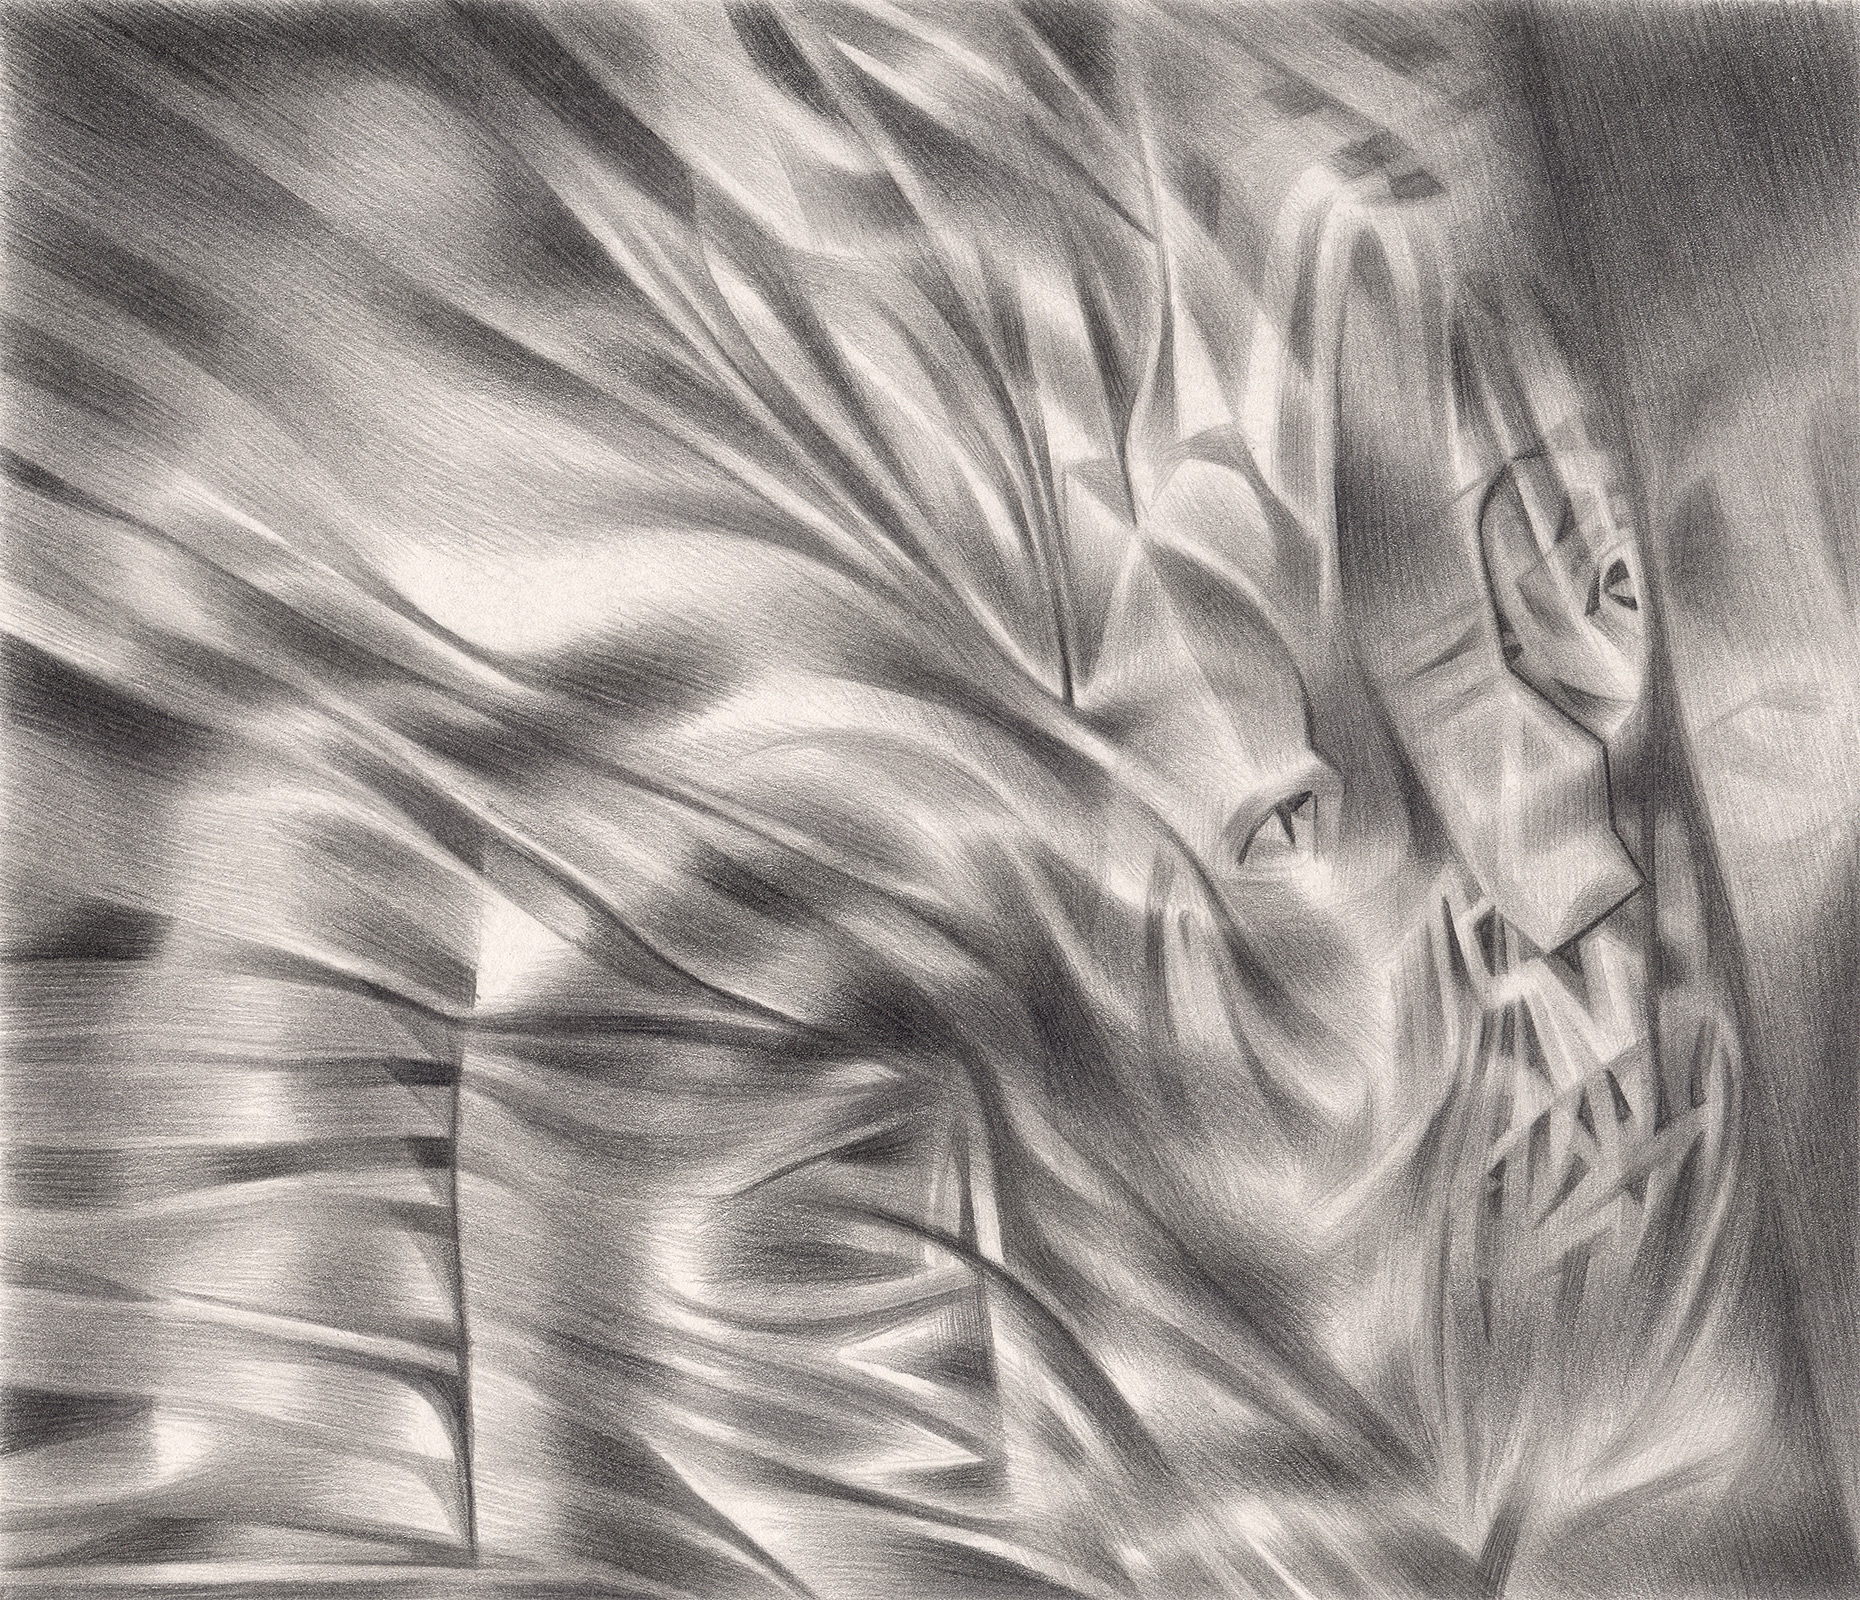   The Anger Effect , 2004. Graphite on paper. 7" x 6". 